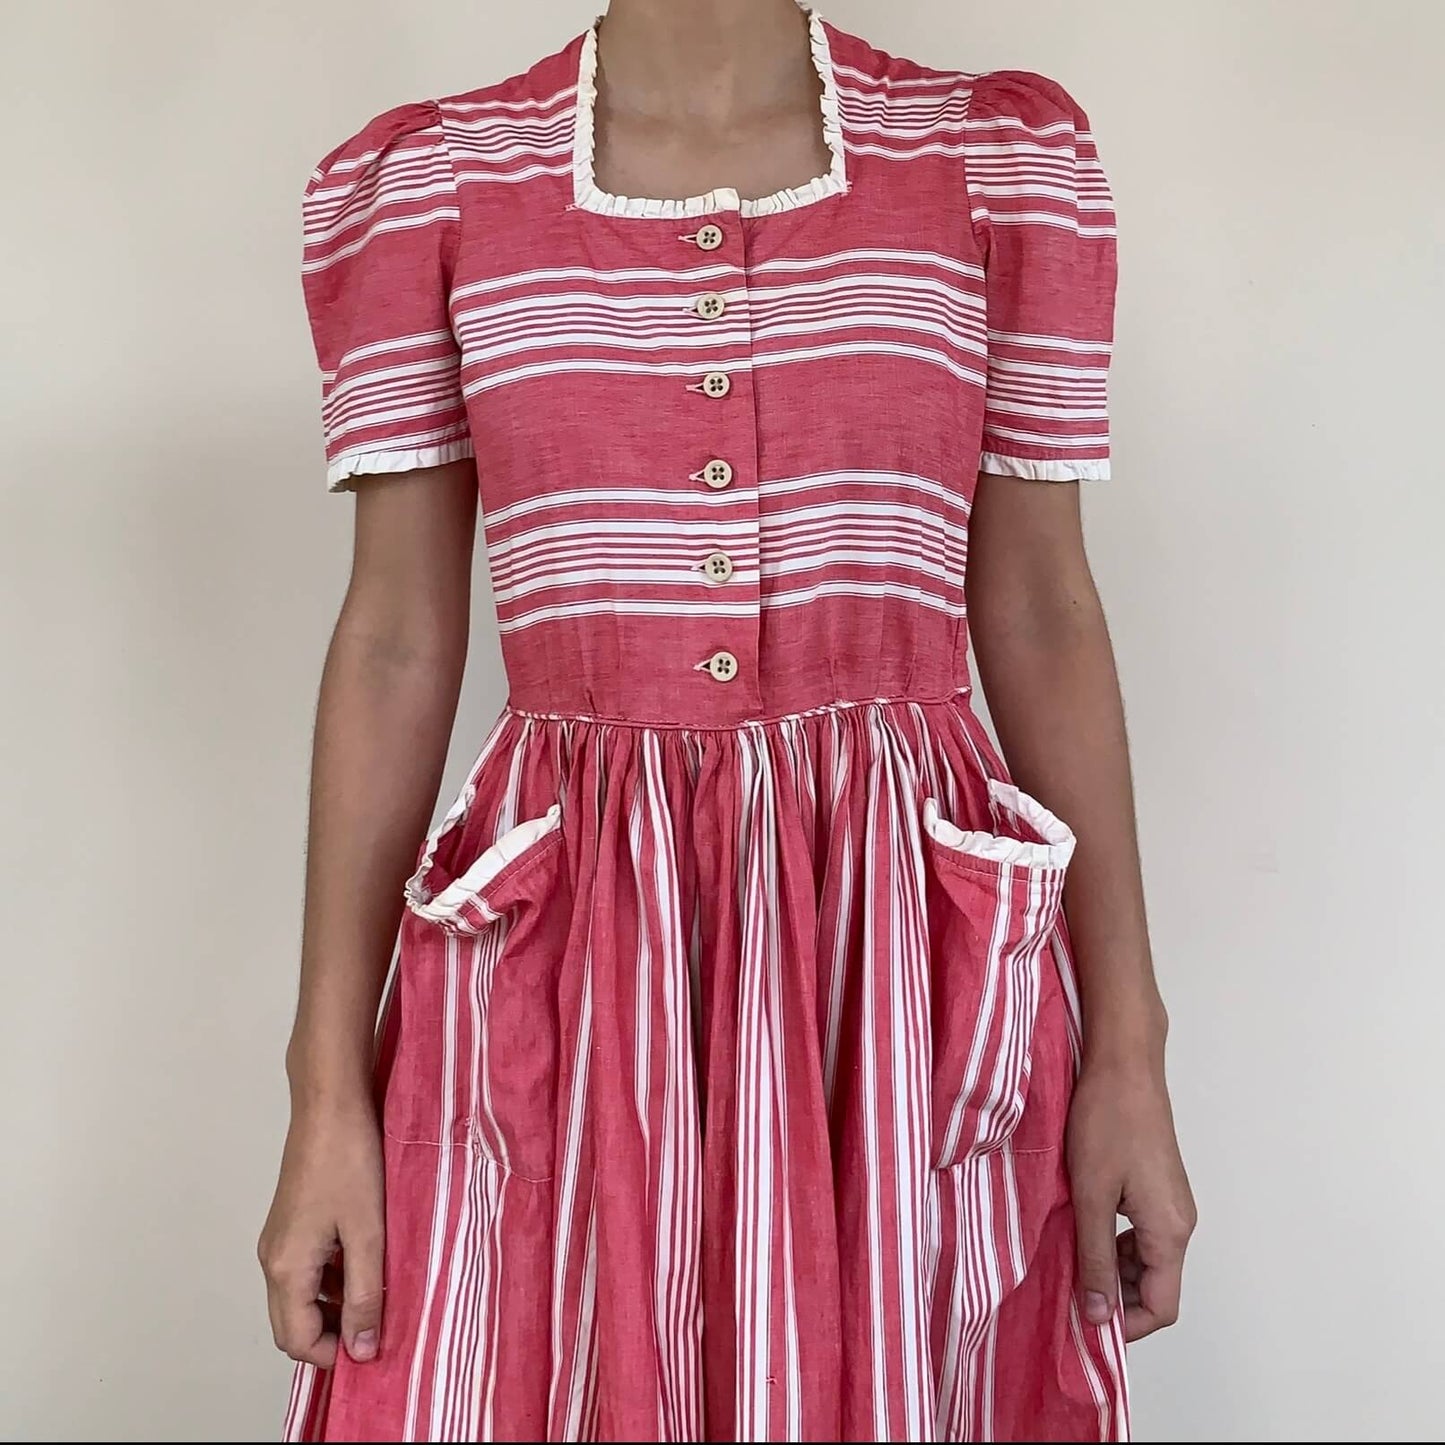 additional view of the vintage pink dress